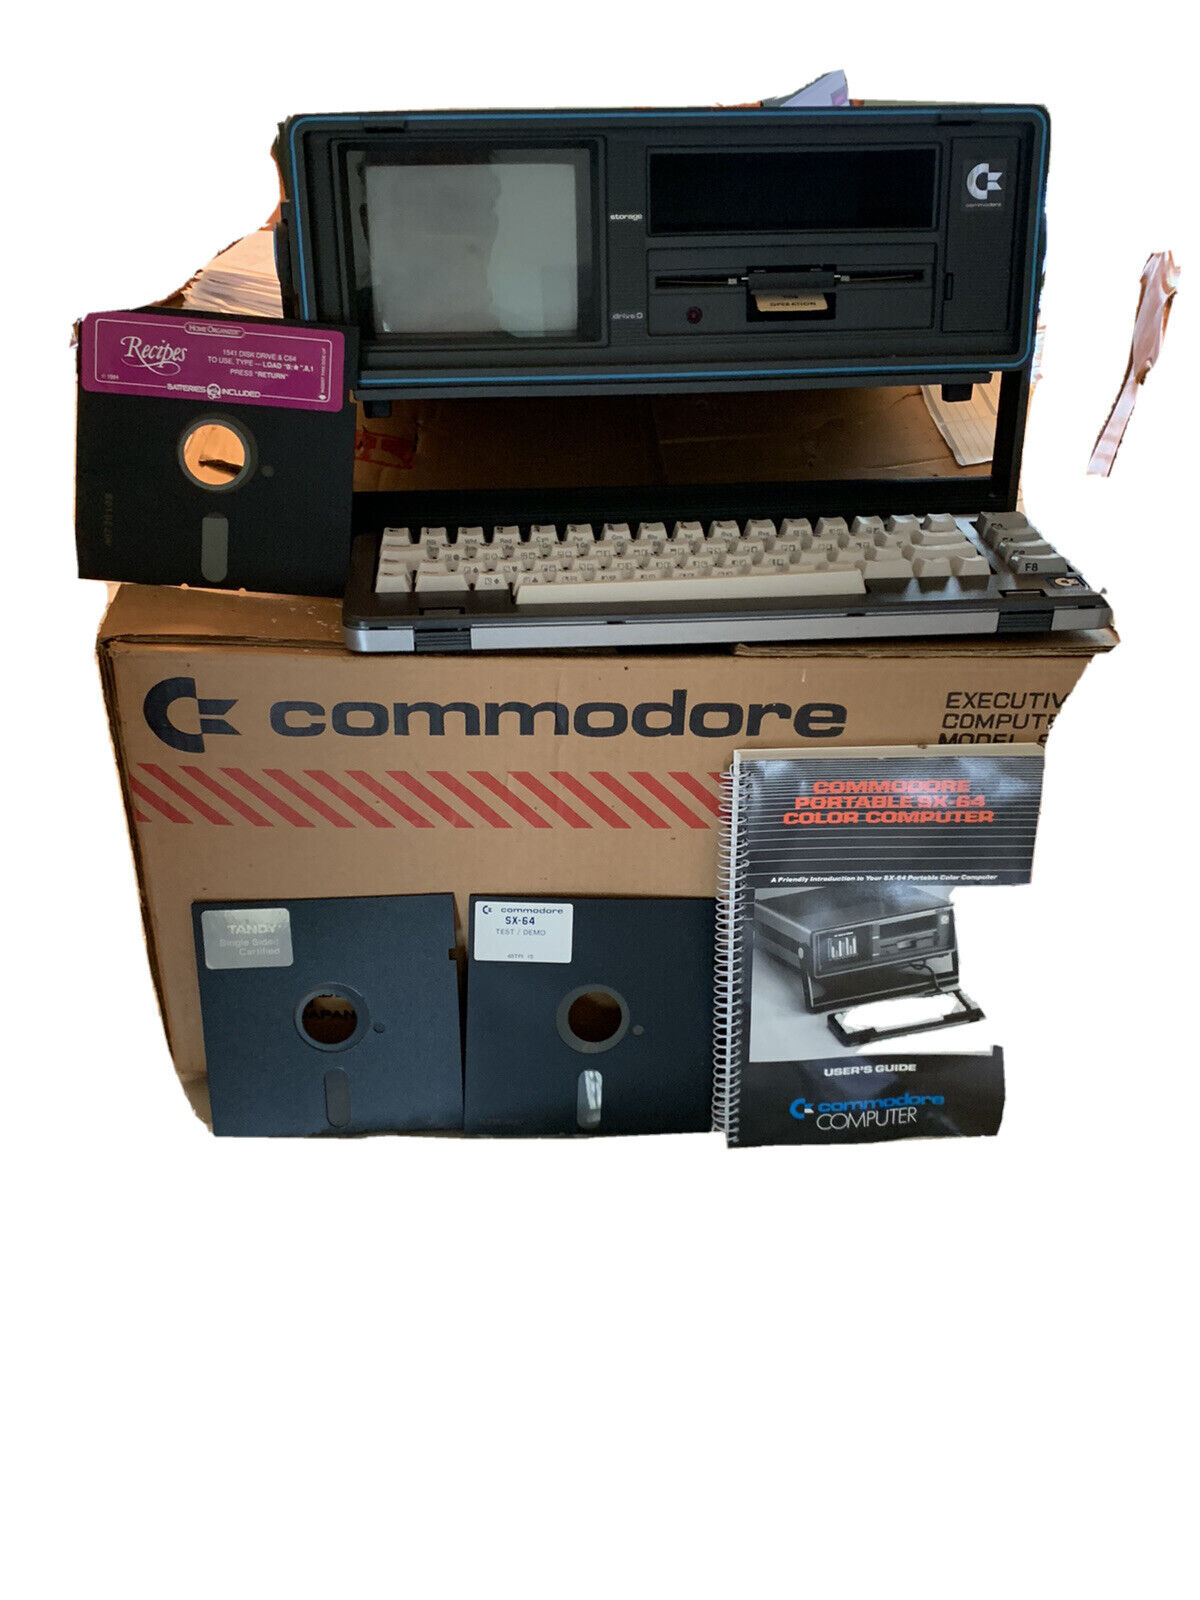 commodore 64 vintage computers mainframes with manual, floppy discs, keyboard